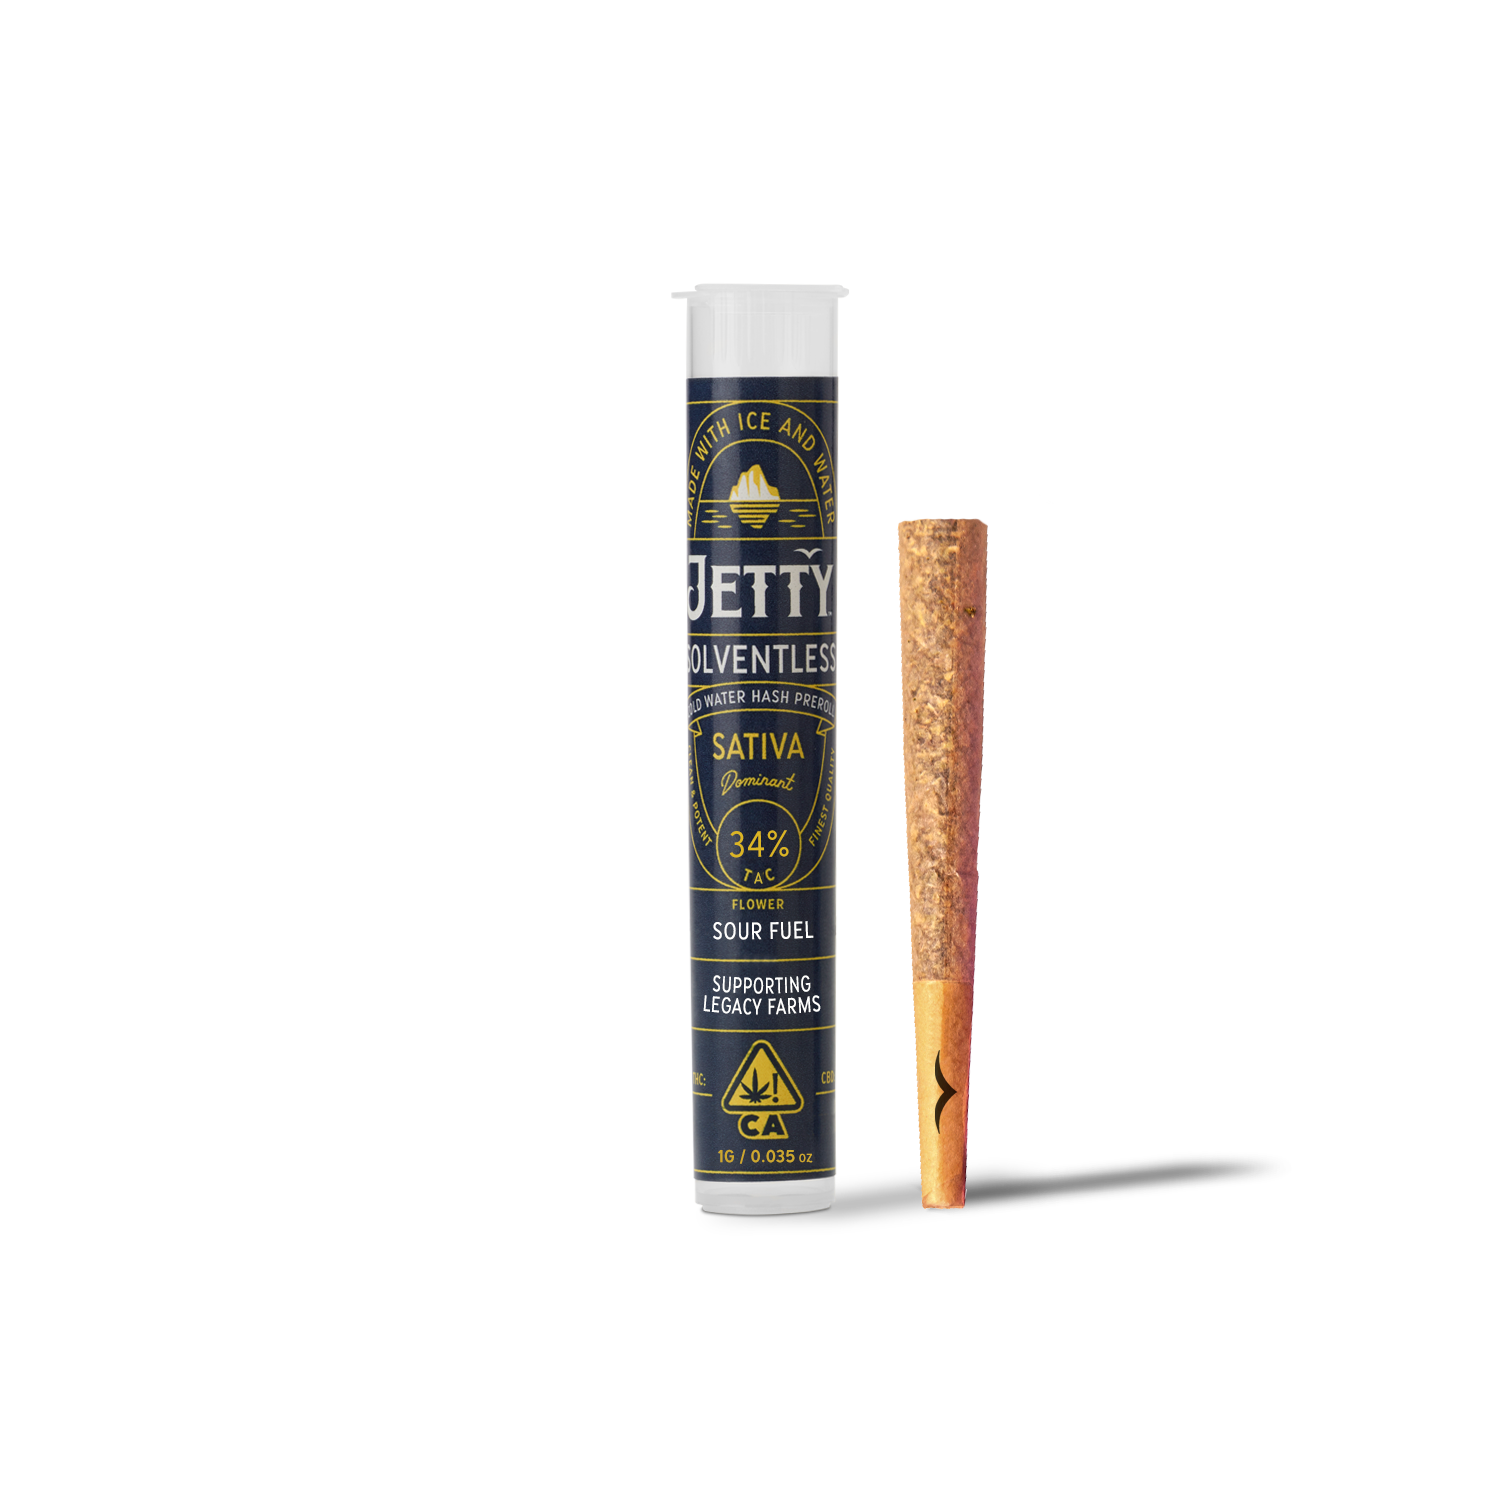 A photograph of Jetty 1g Solventless Preroll Sour Fuel